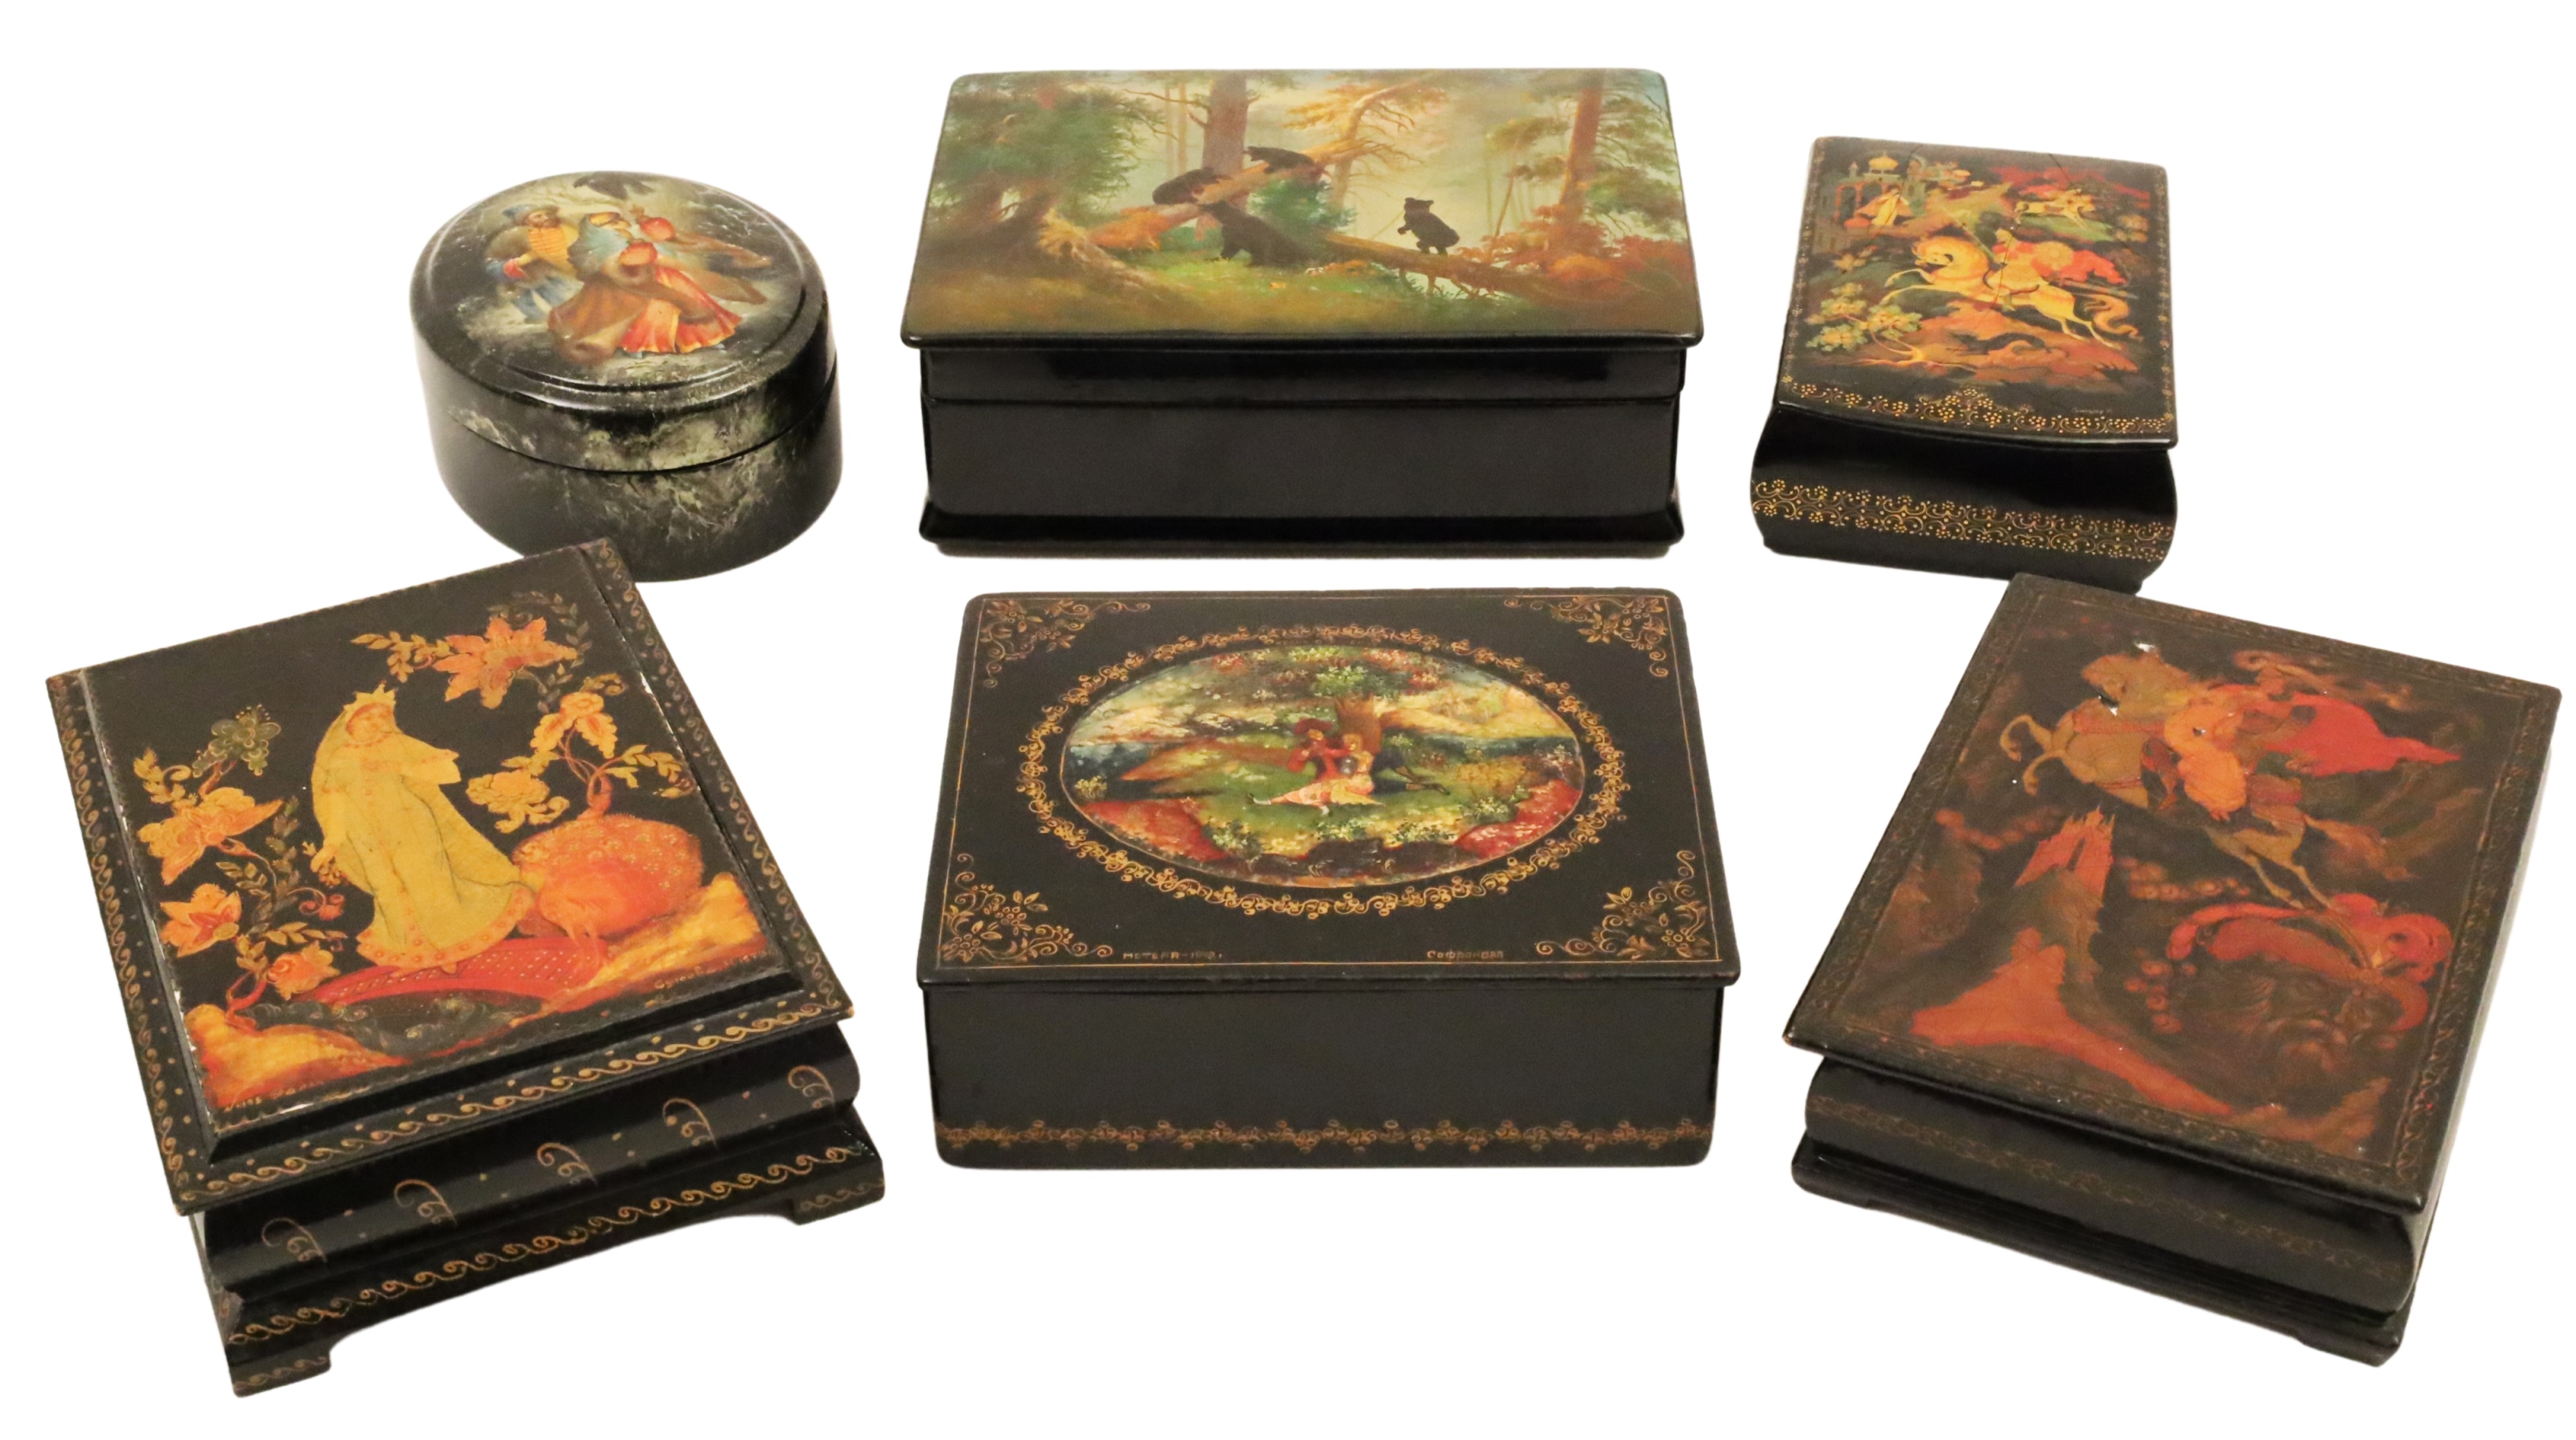 GROUP OF 6 RUSSIAN LACQUER BOXES 2f9099